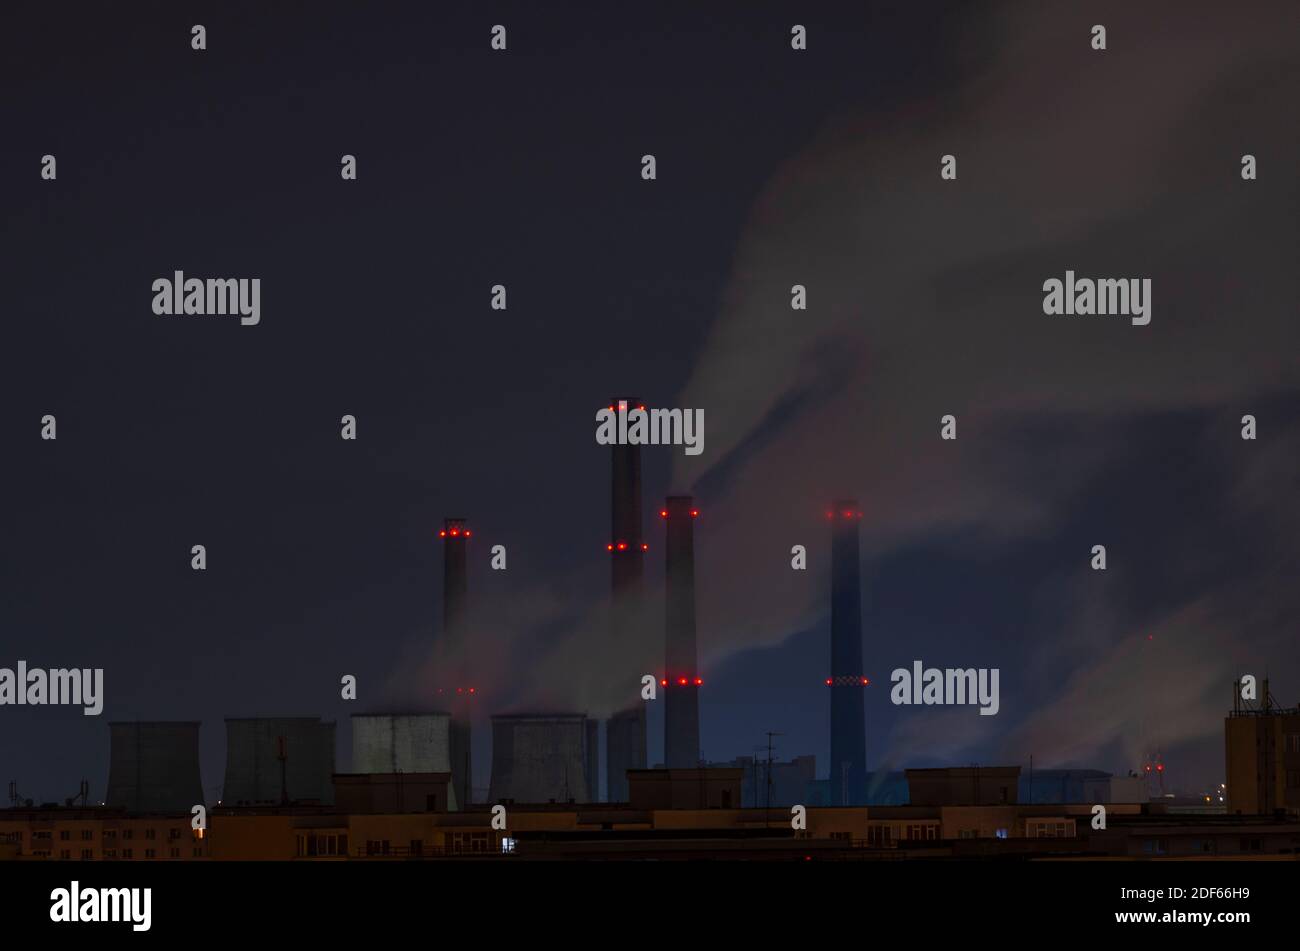 BUCHAREST, ROMANIA - 03 December 2020 - Night view of a coal-fired power station in Bucharest, Romania - Photo: Geopixnight Stock Photo